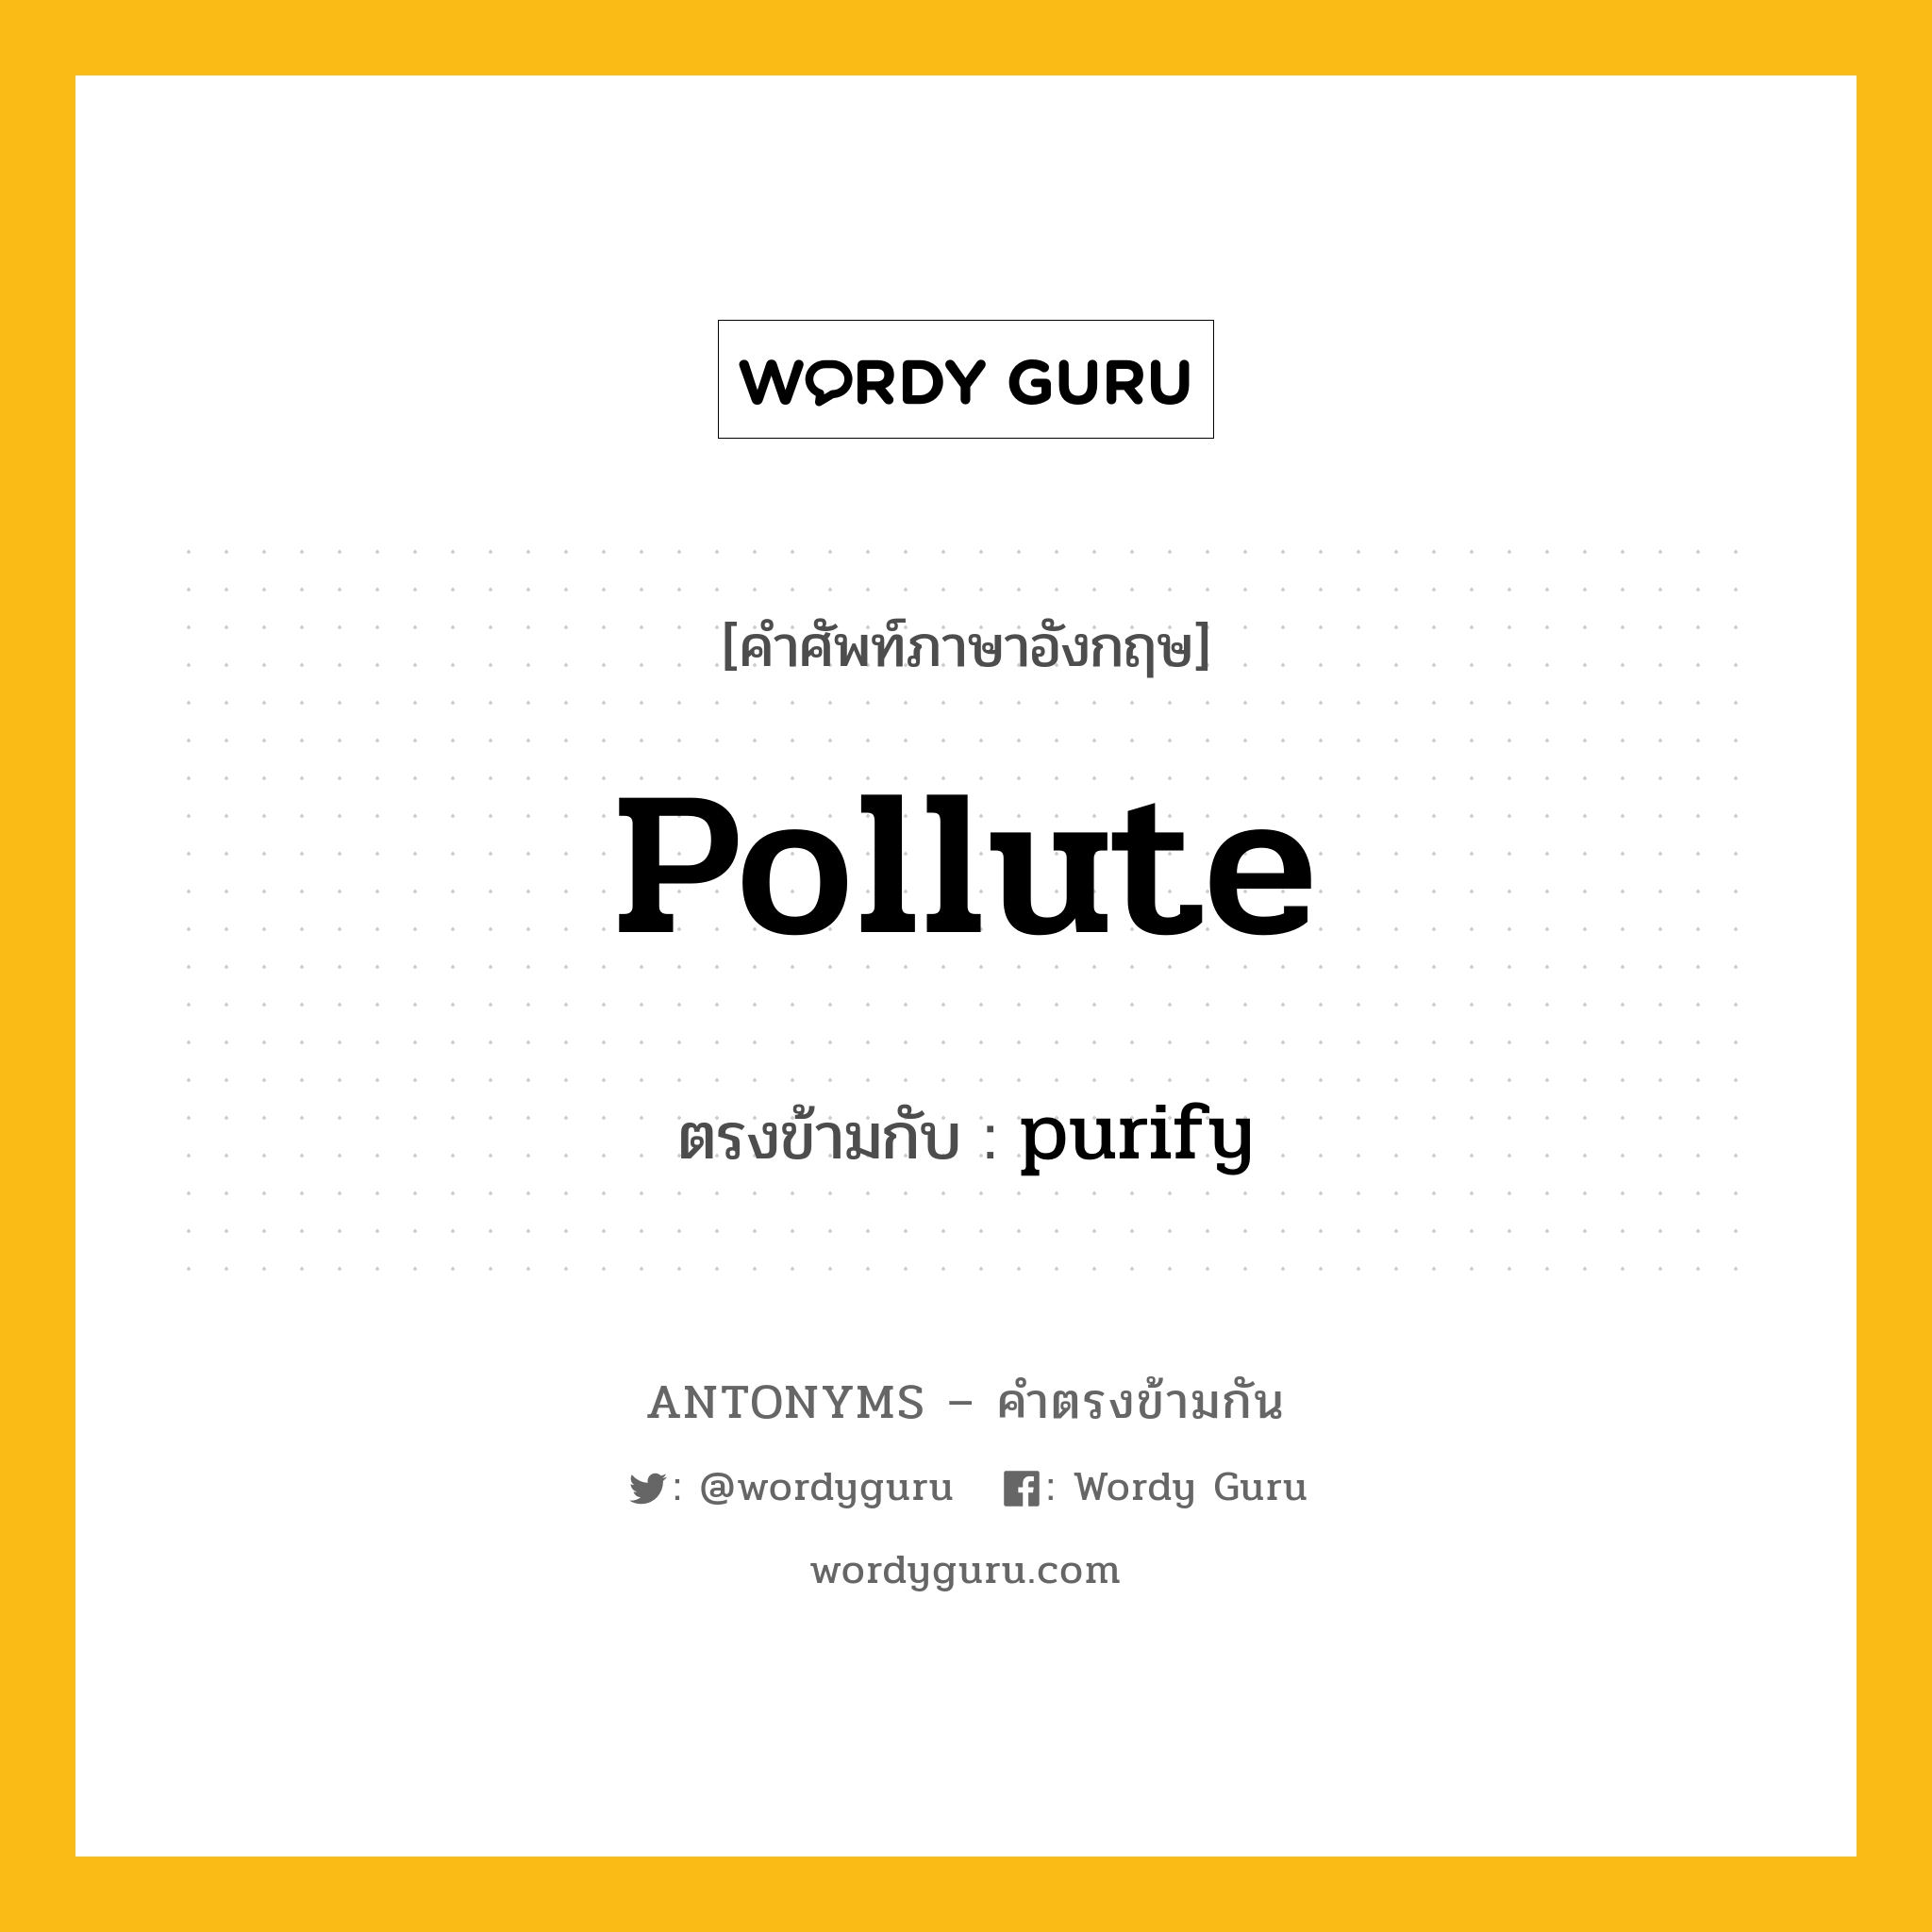 pollute